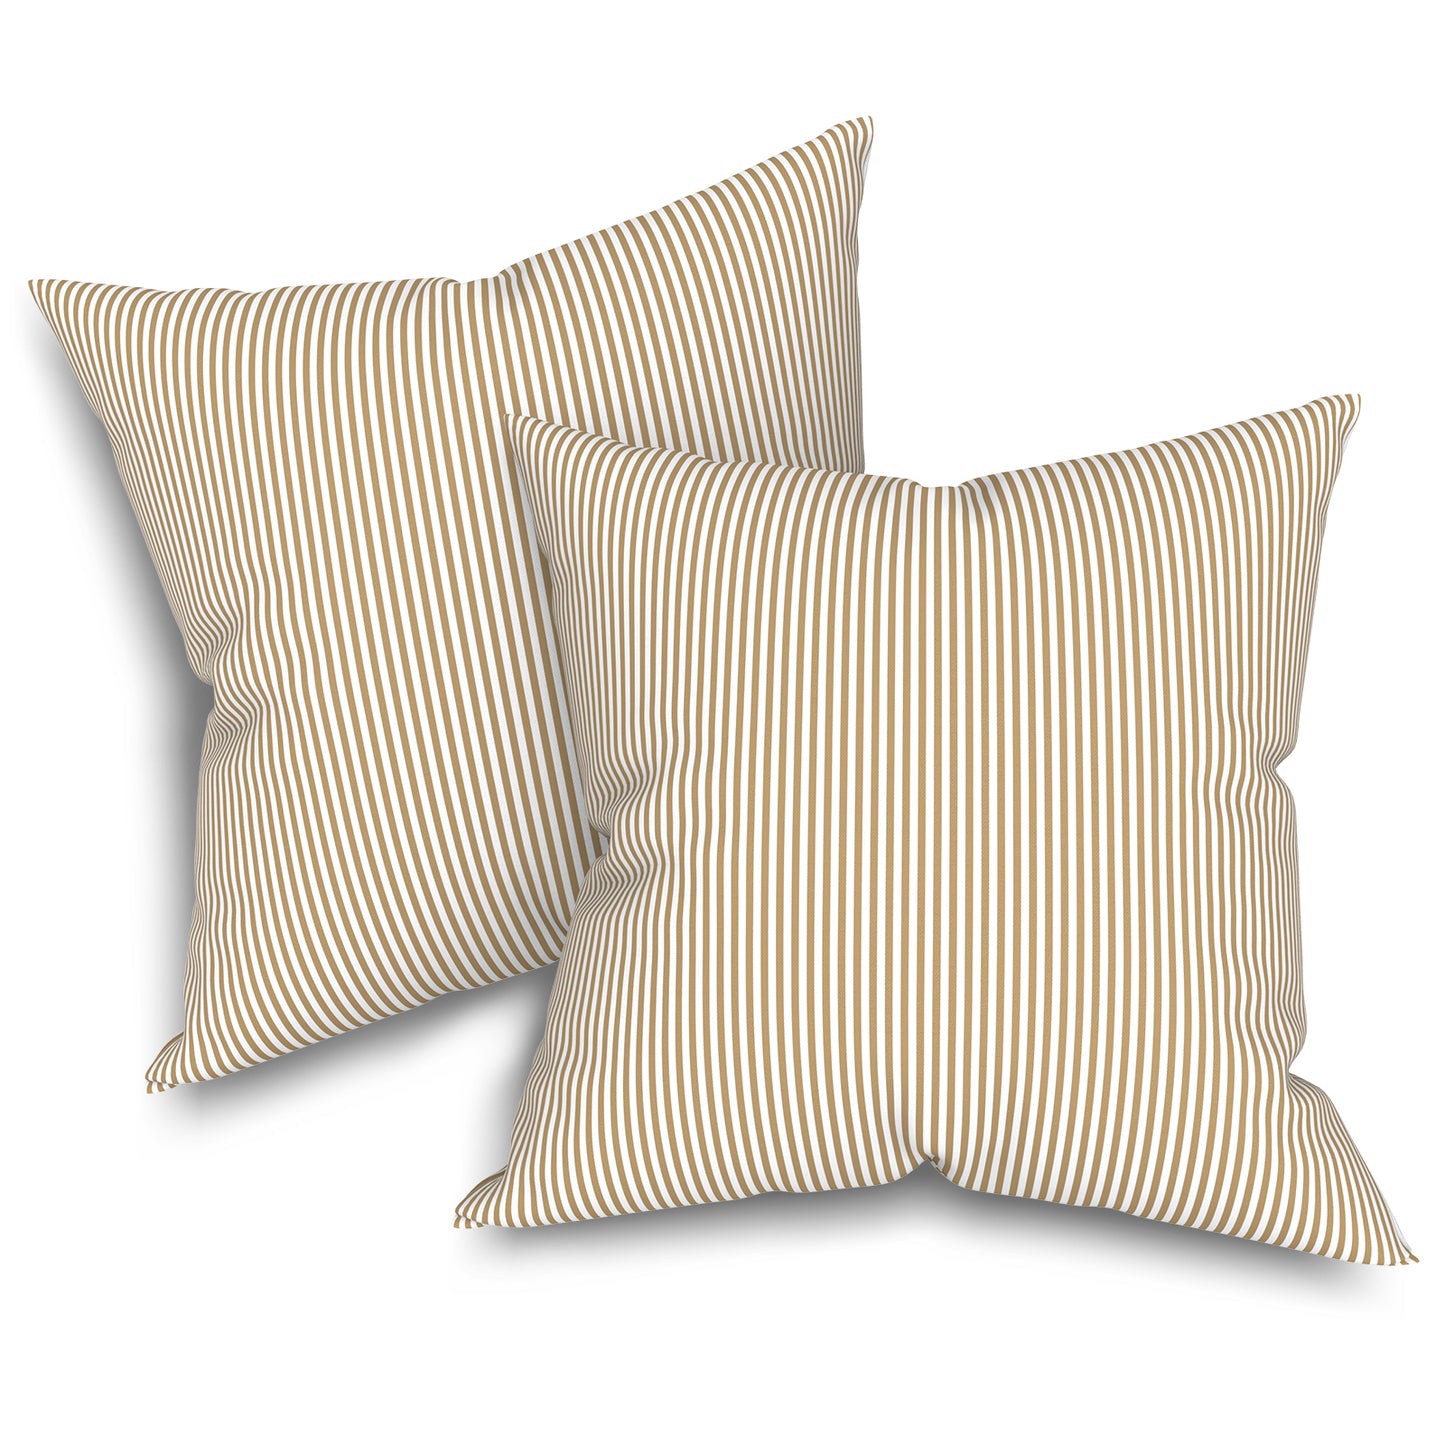 Melody Elephant Patio Throw Pillows with Inners, Fade Resistant Square Pillow Pack of 2, Decorative Garden Cushions for Home, 18x18 Inch, Stripe Beige